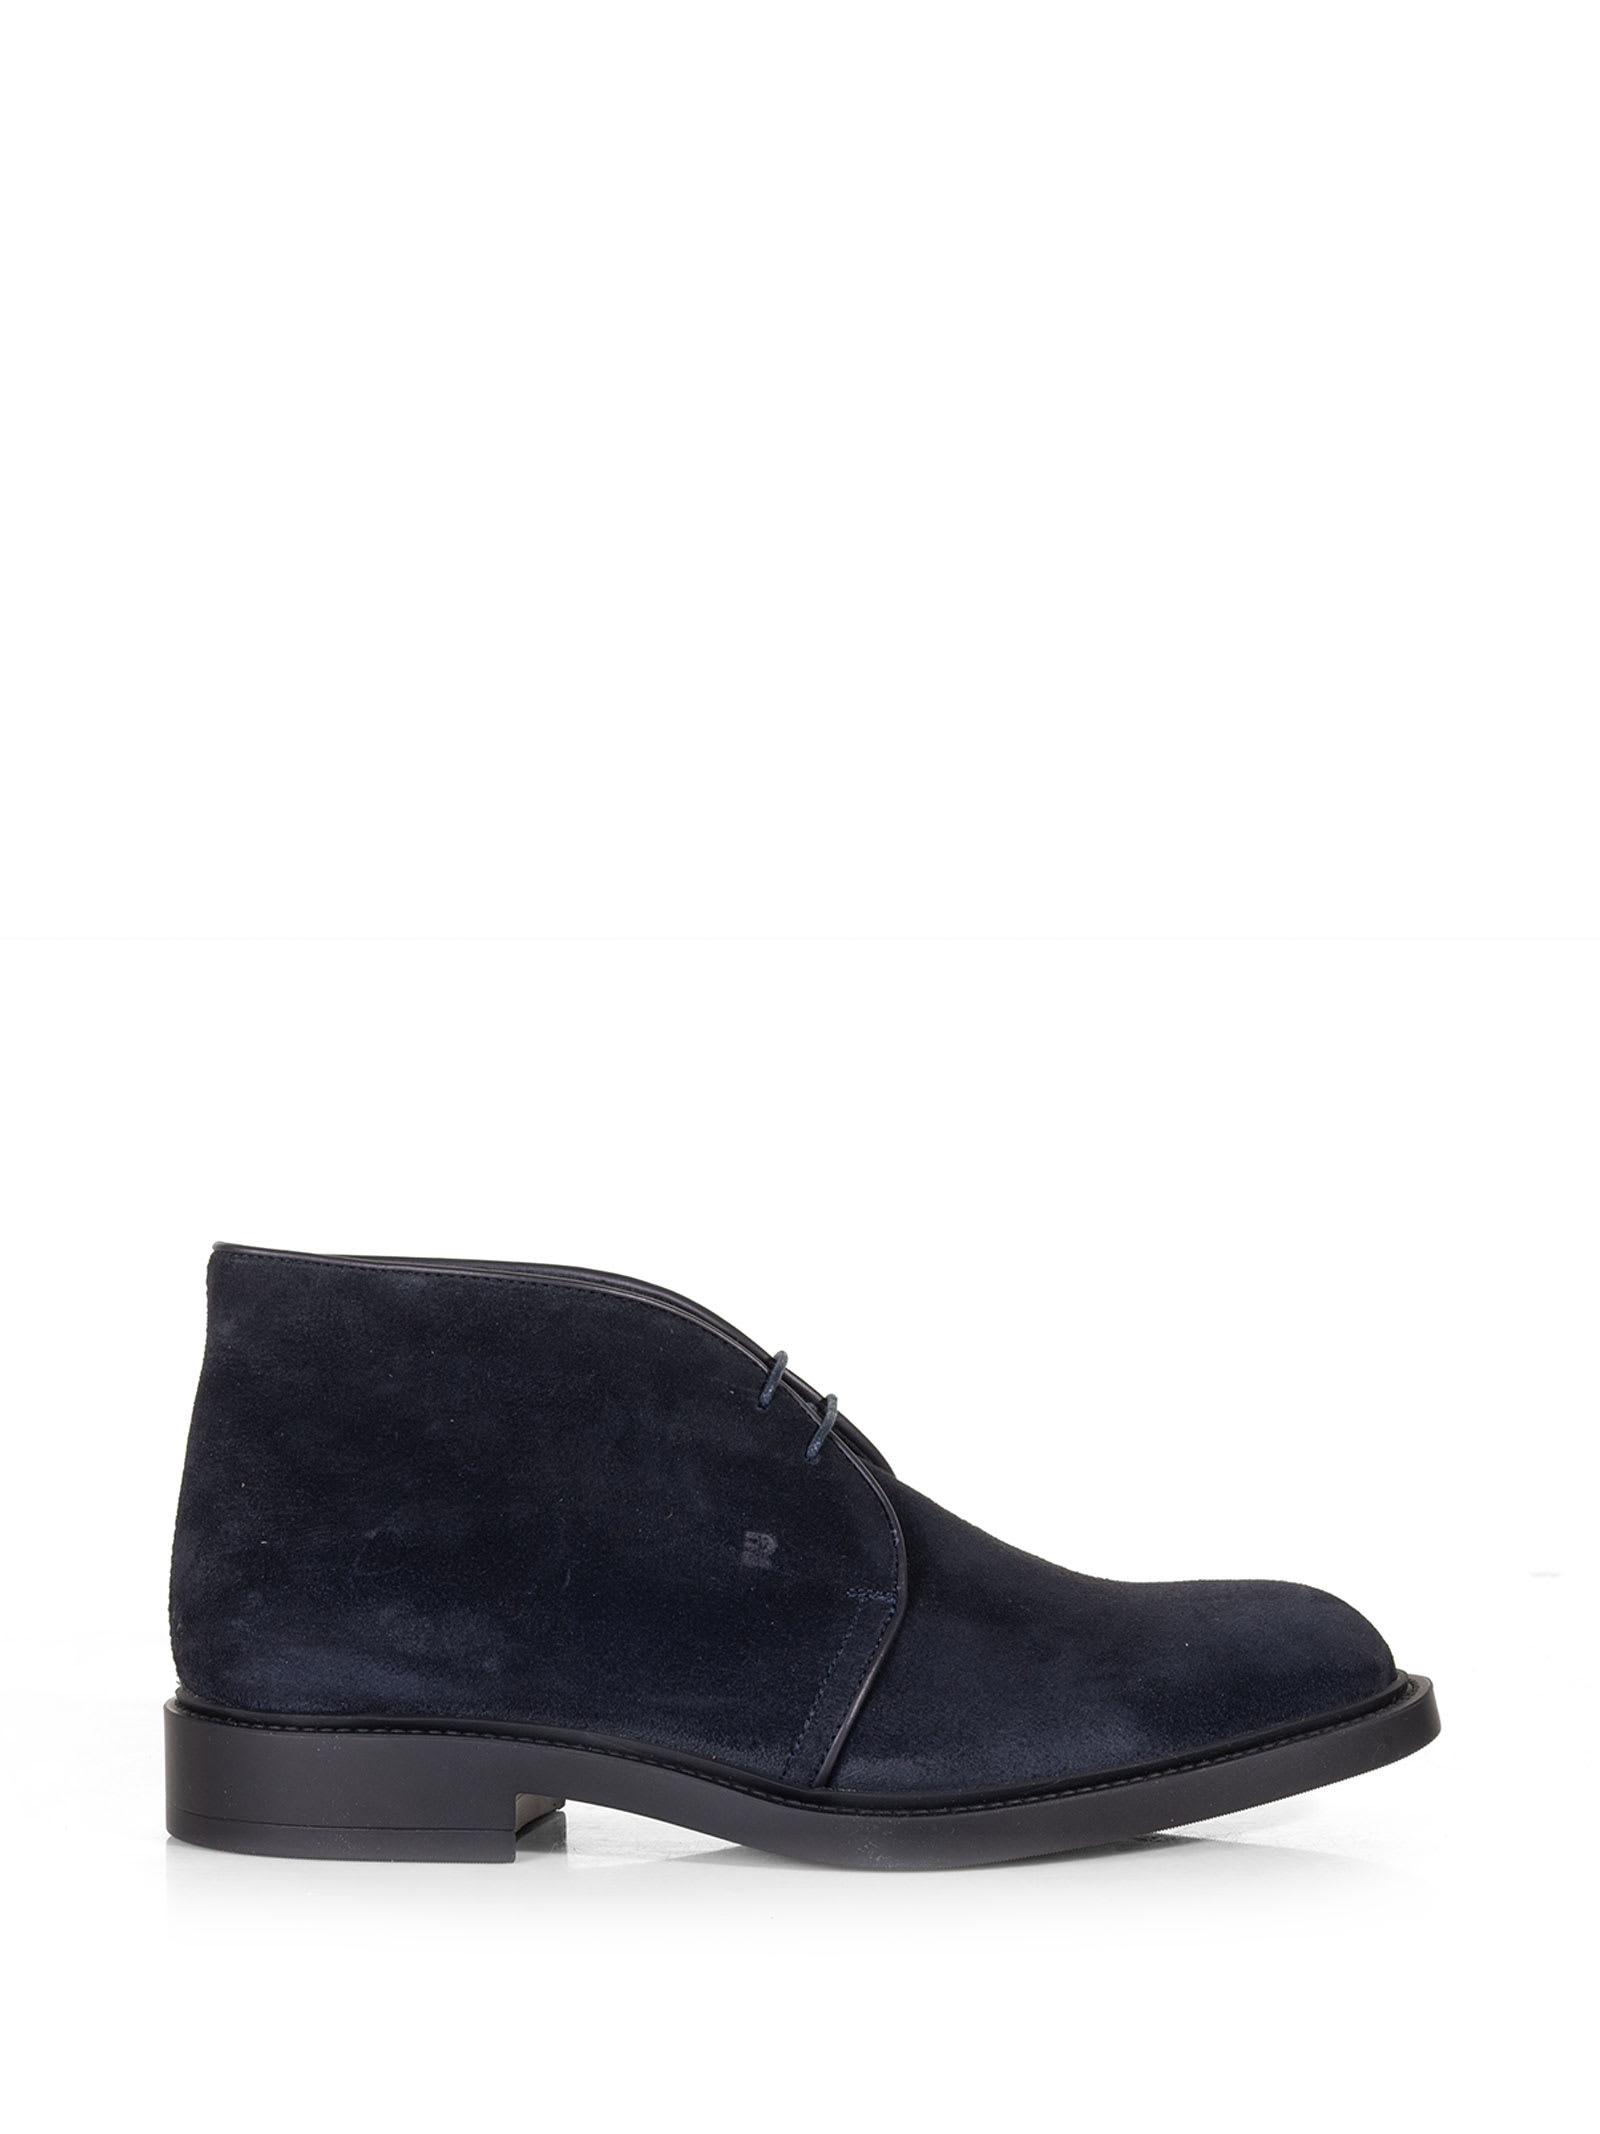 Fratelli Rossetti One Ankle Boot In Navy Blue Suede